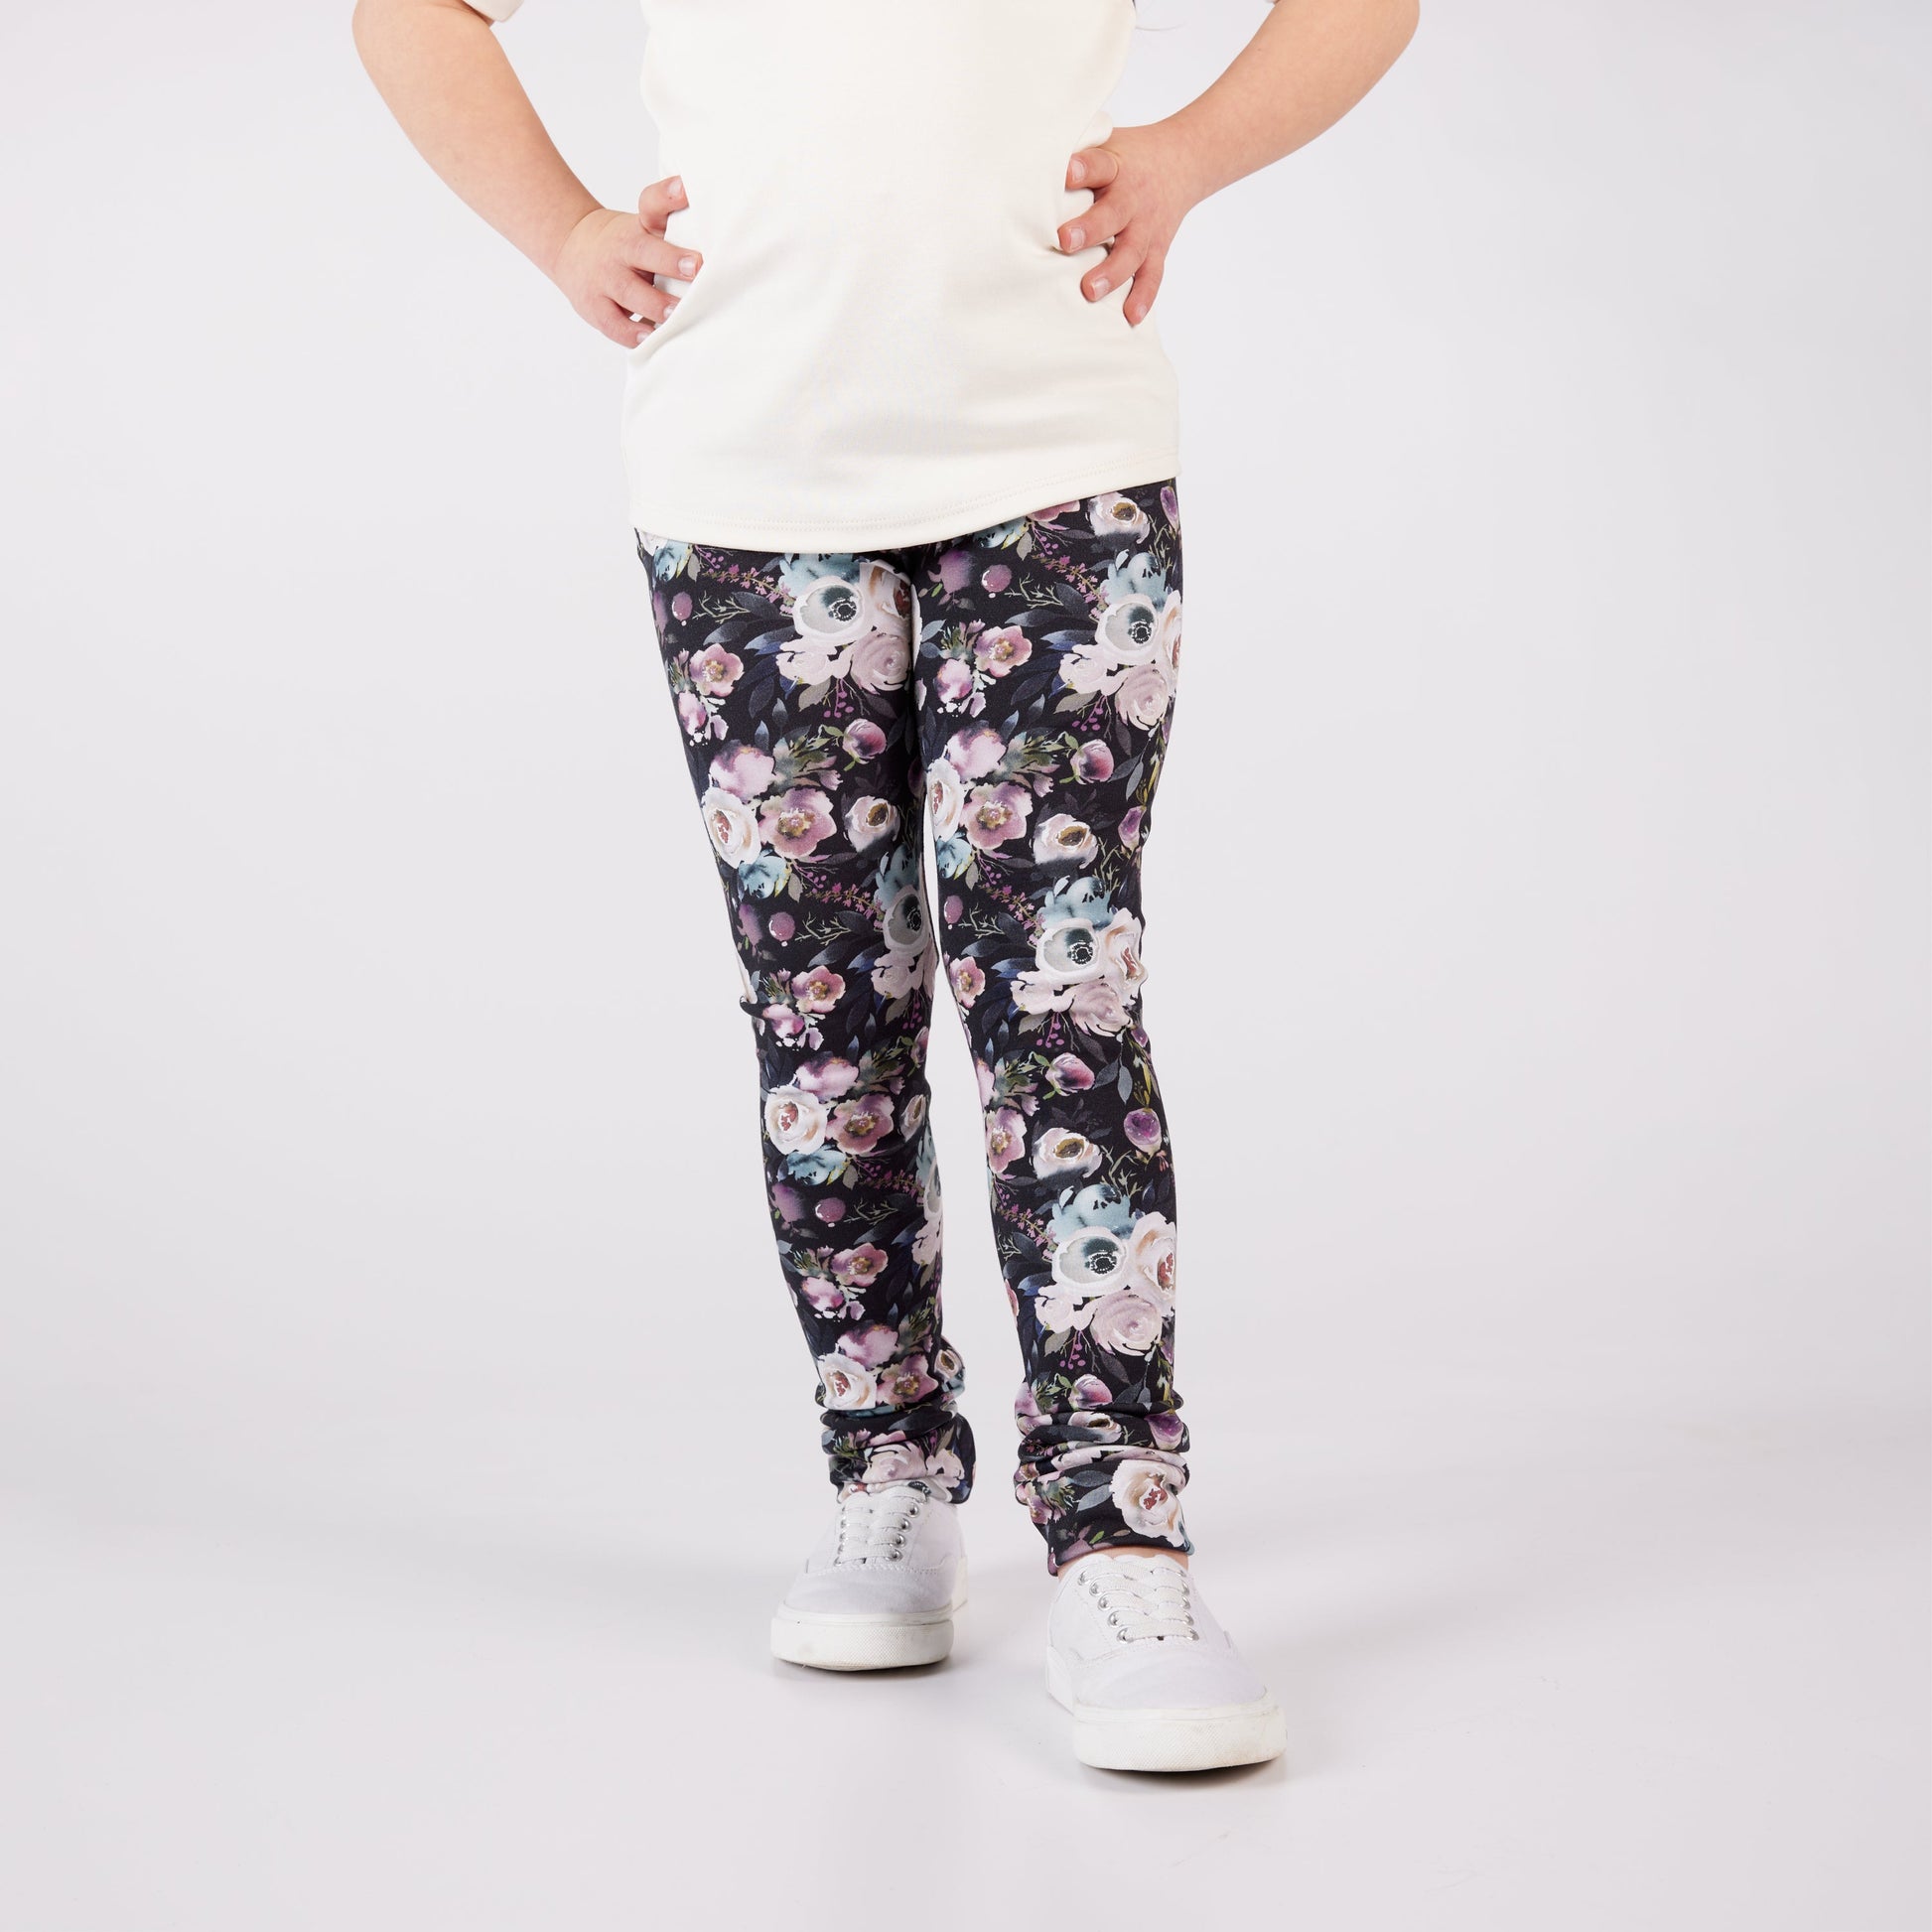 Floral Print Leggings For Baby Girls Warm Baby Tights, Sizes 50 65